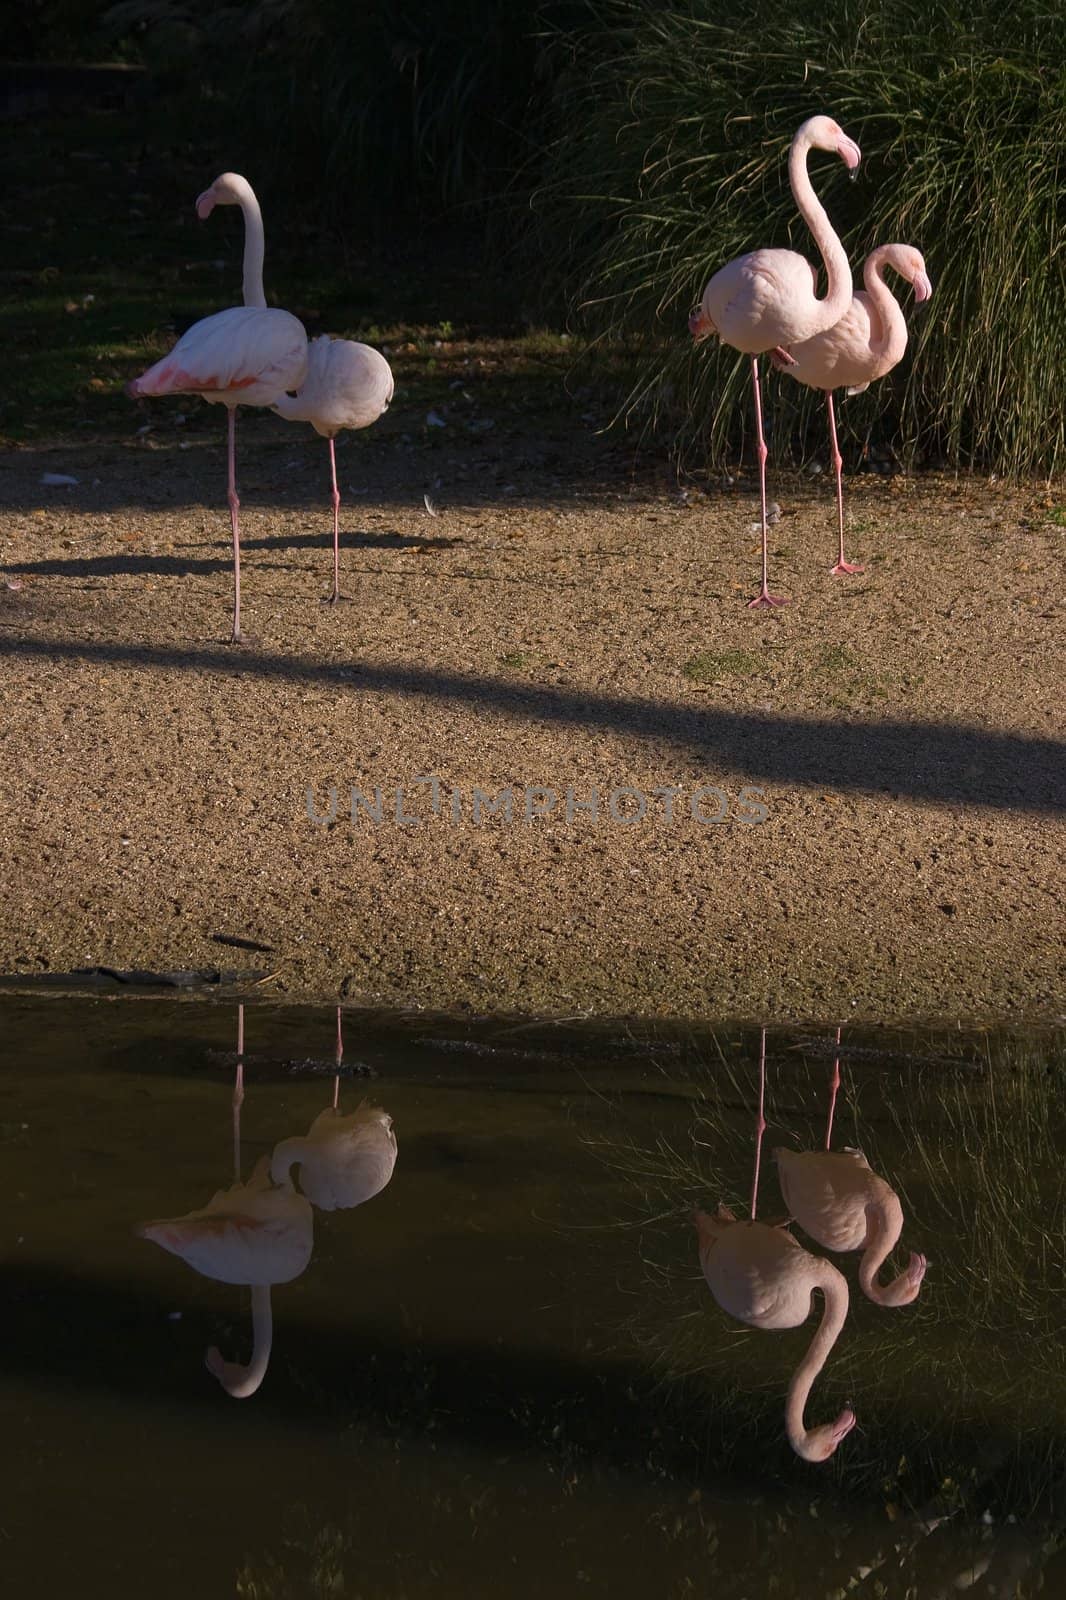 Two pink flamingo's with reflection in the water